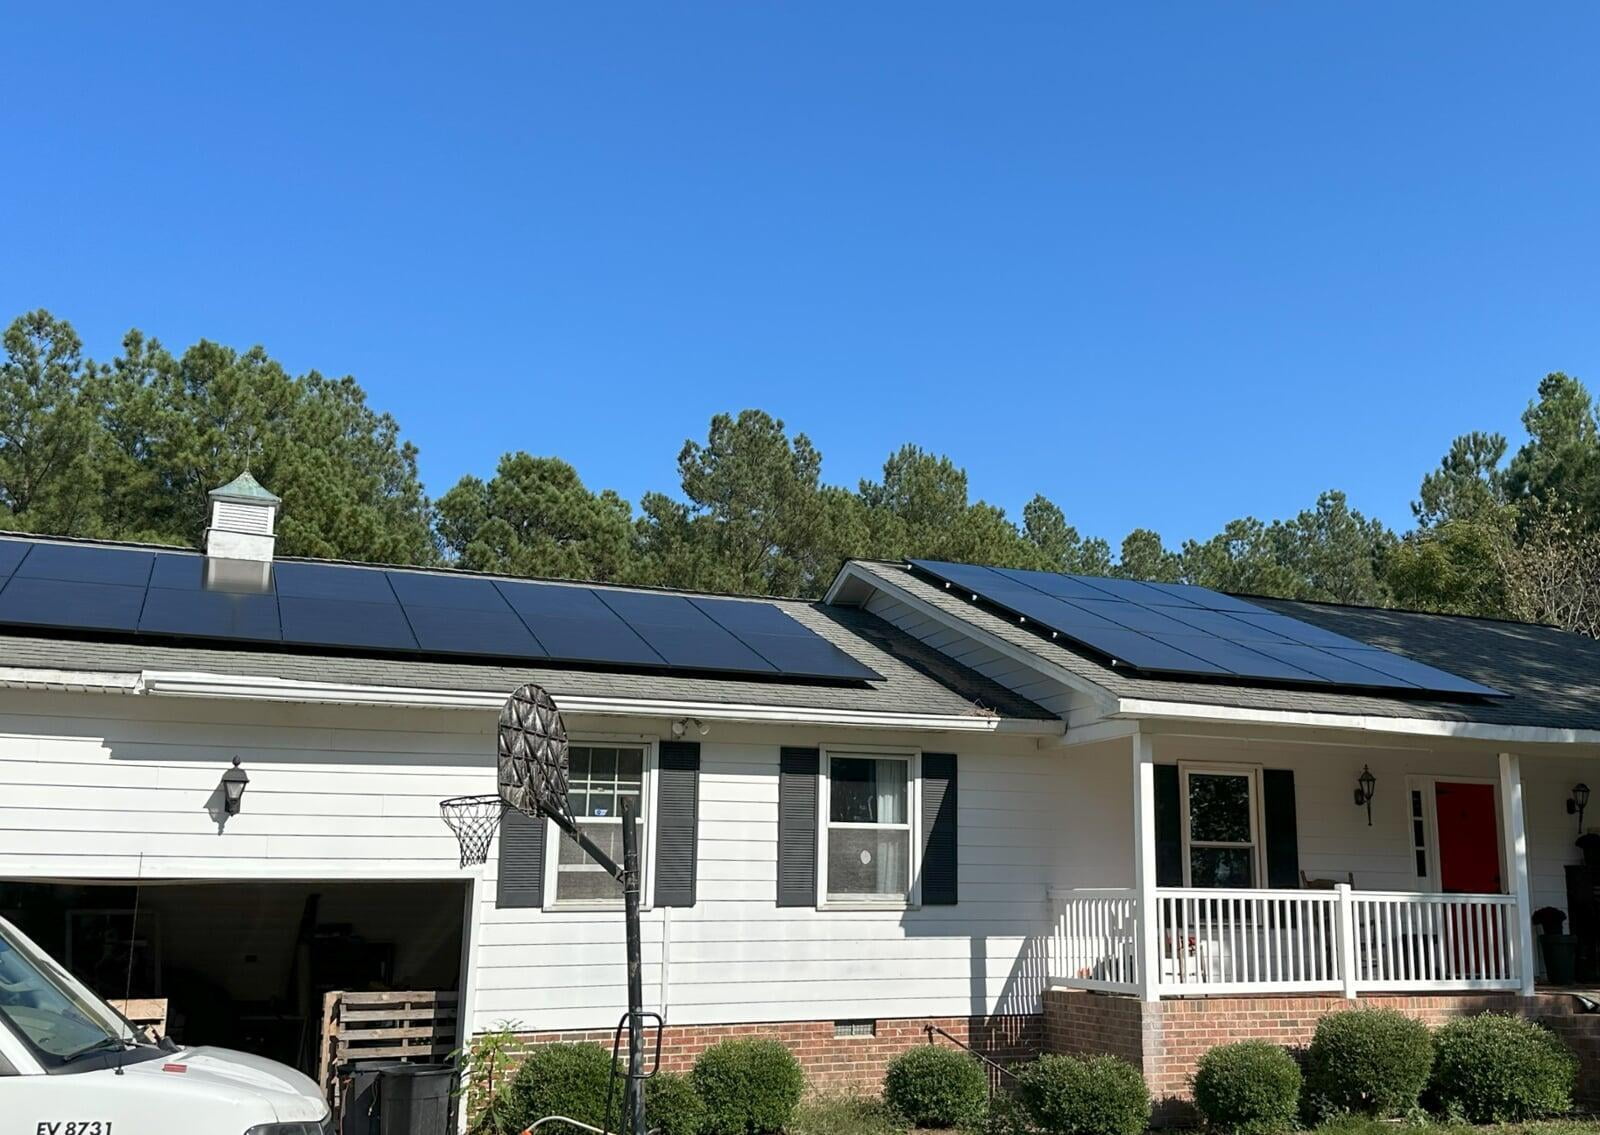 The Case for Net Metering